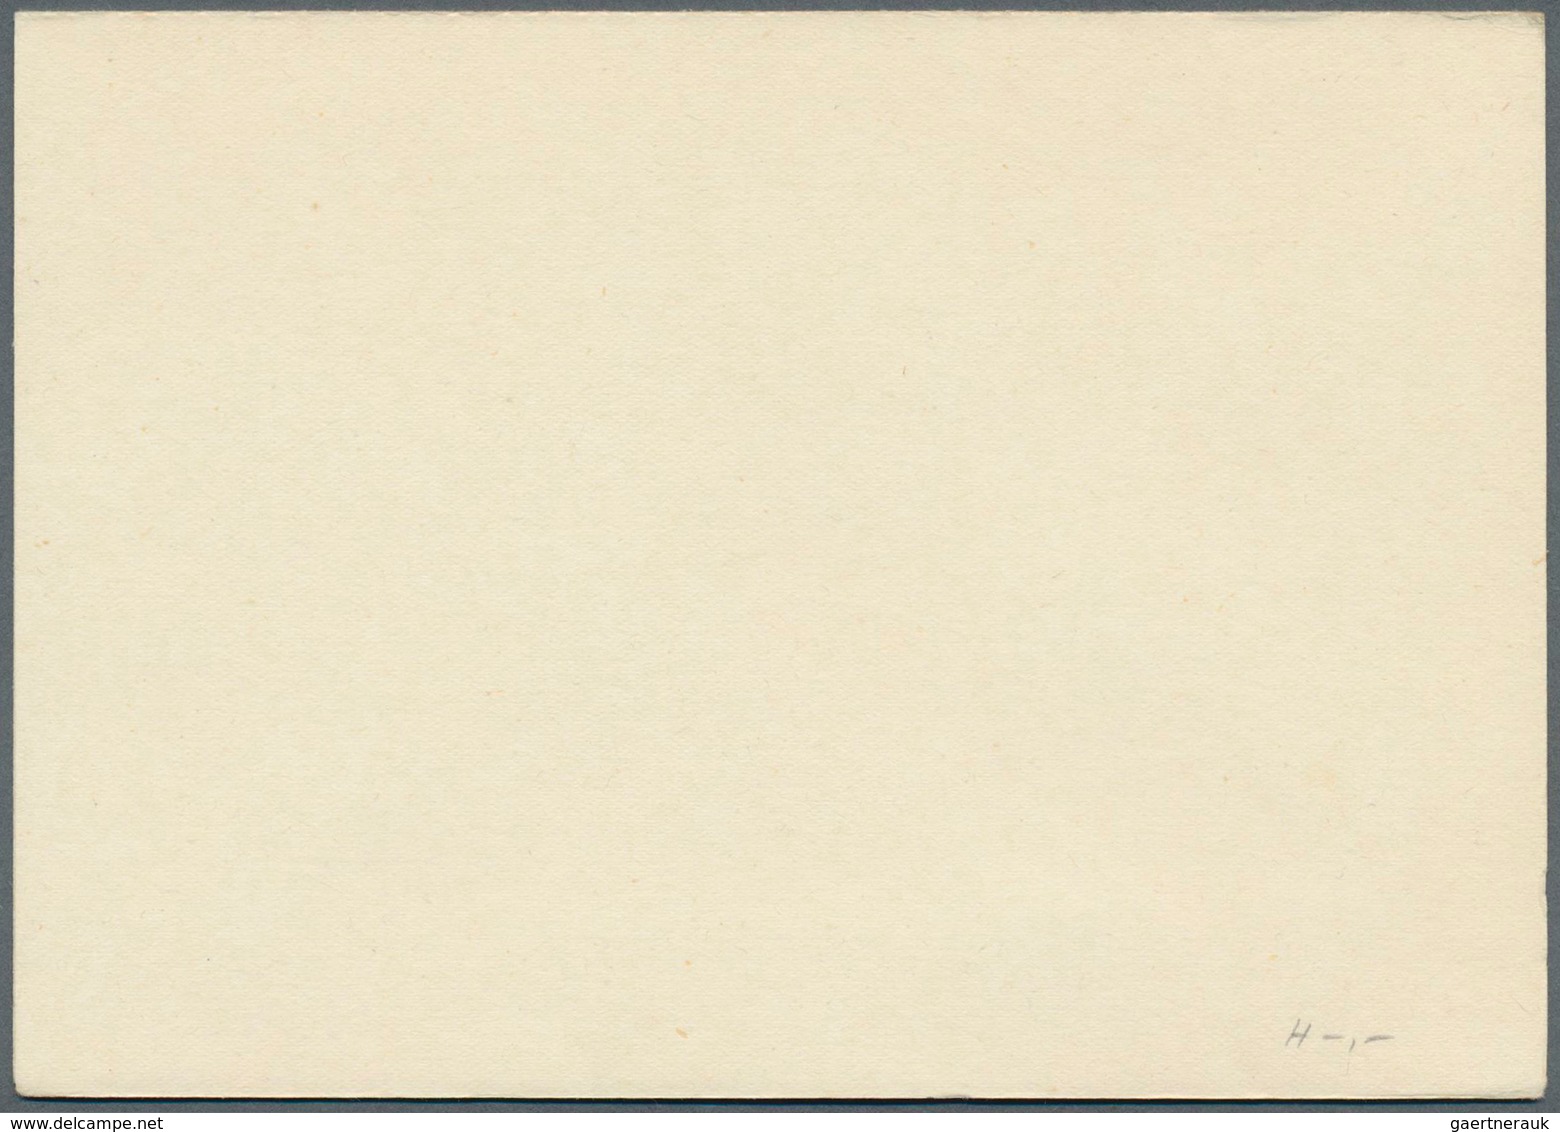 Italien - Ganzsachen: 1961: 40 L. + 40 L. Double Postal Stationery Card, "40 L Bilingual", Very Fine - Stamped Stationery